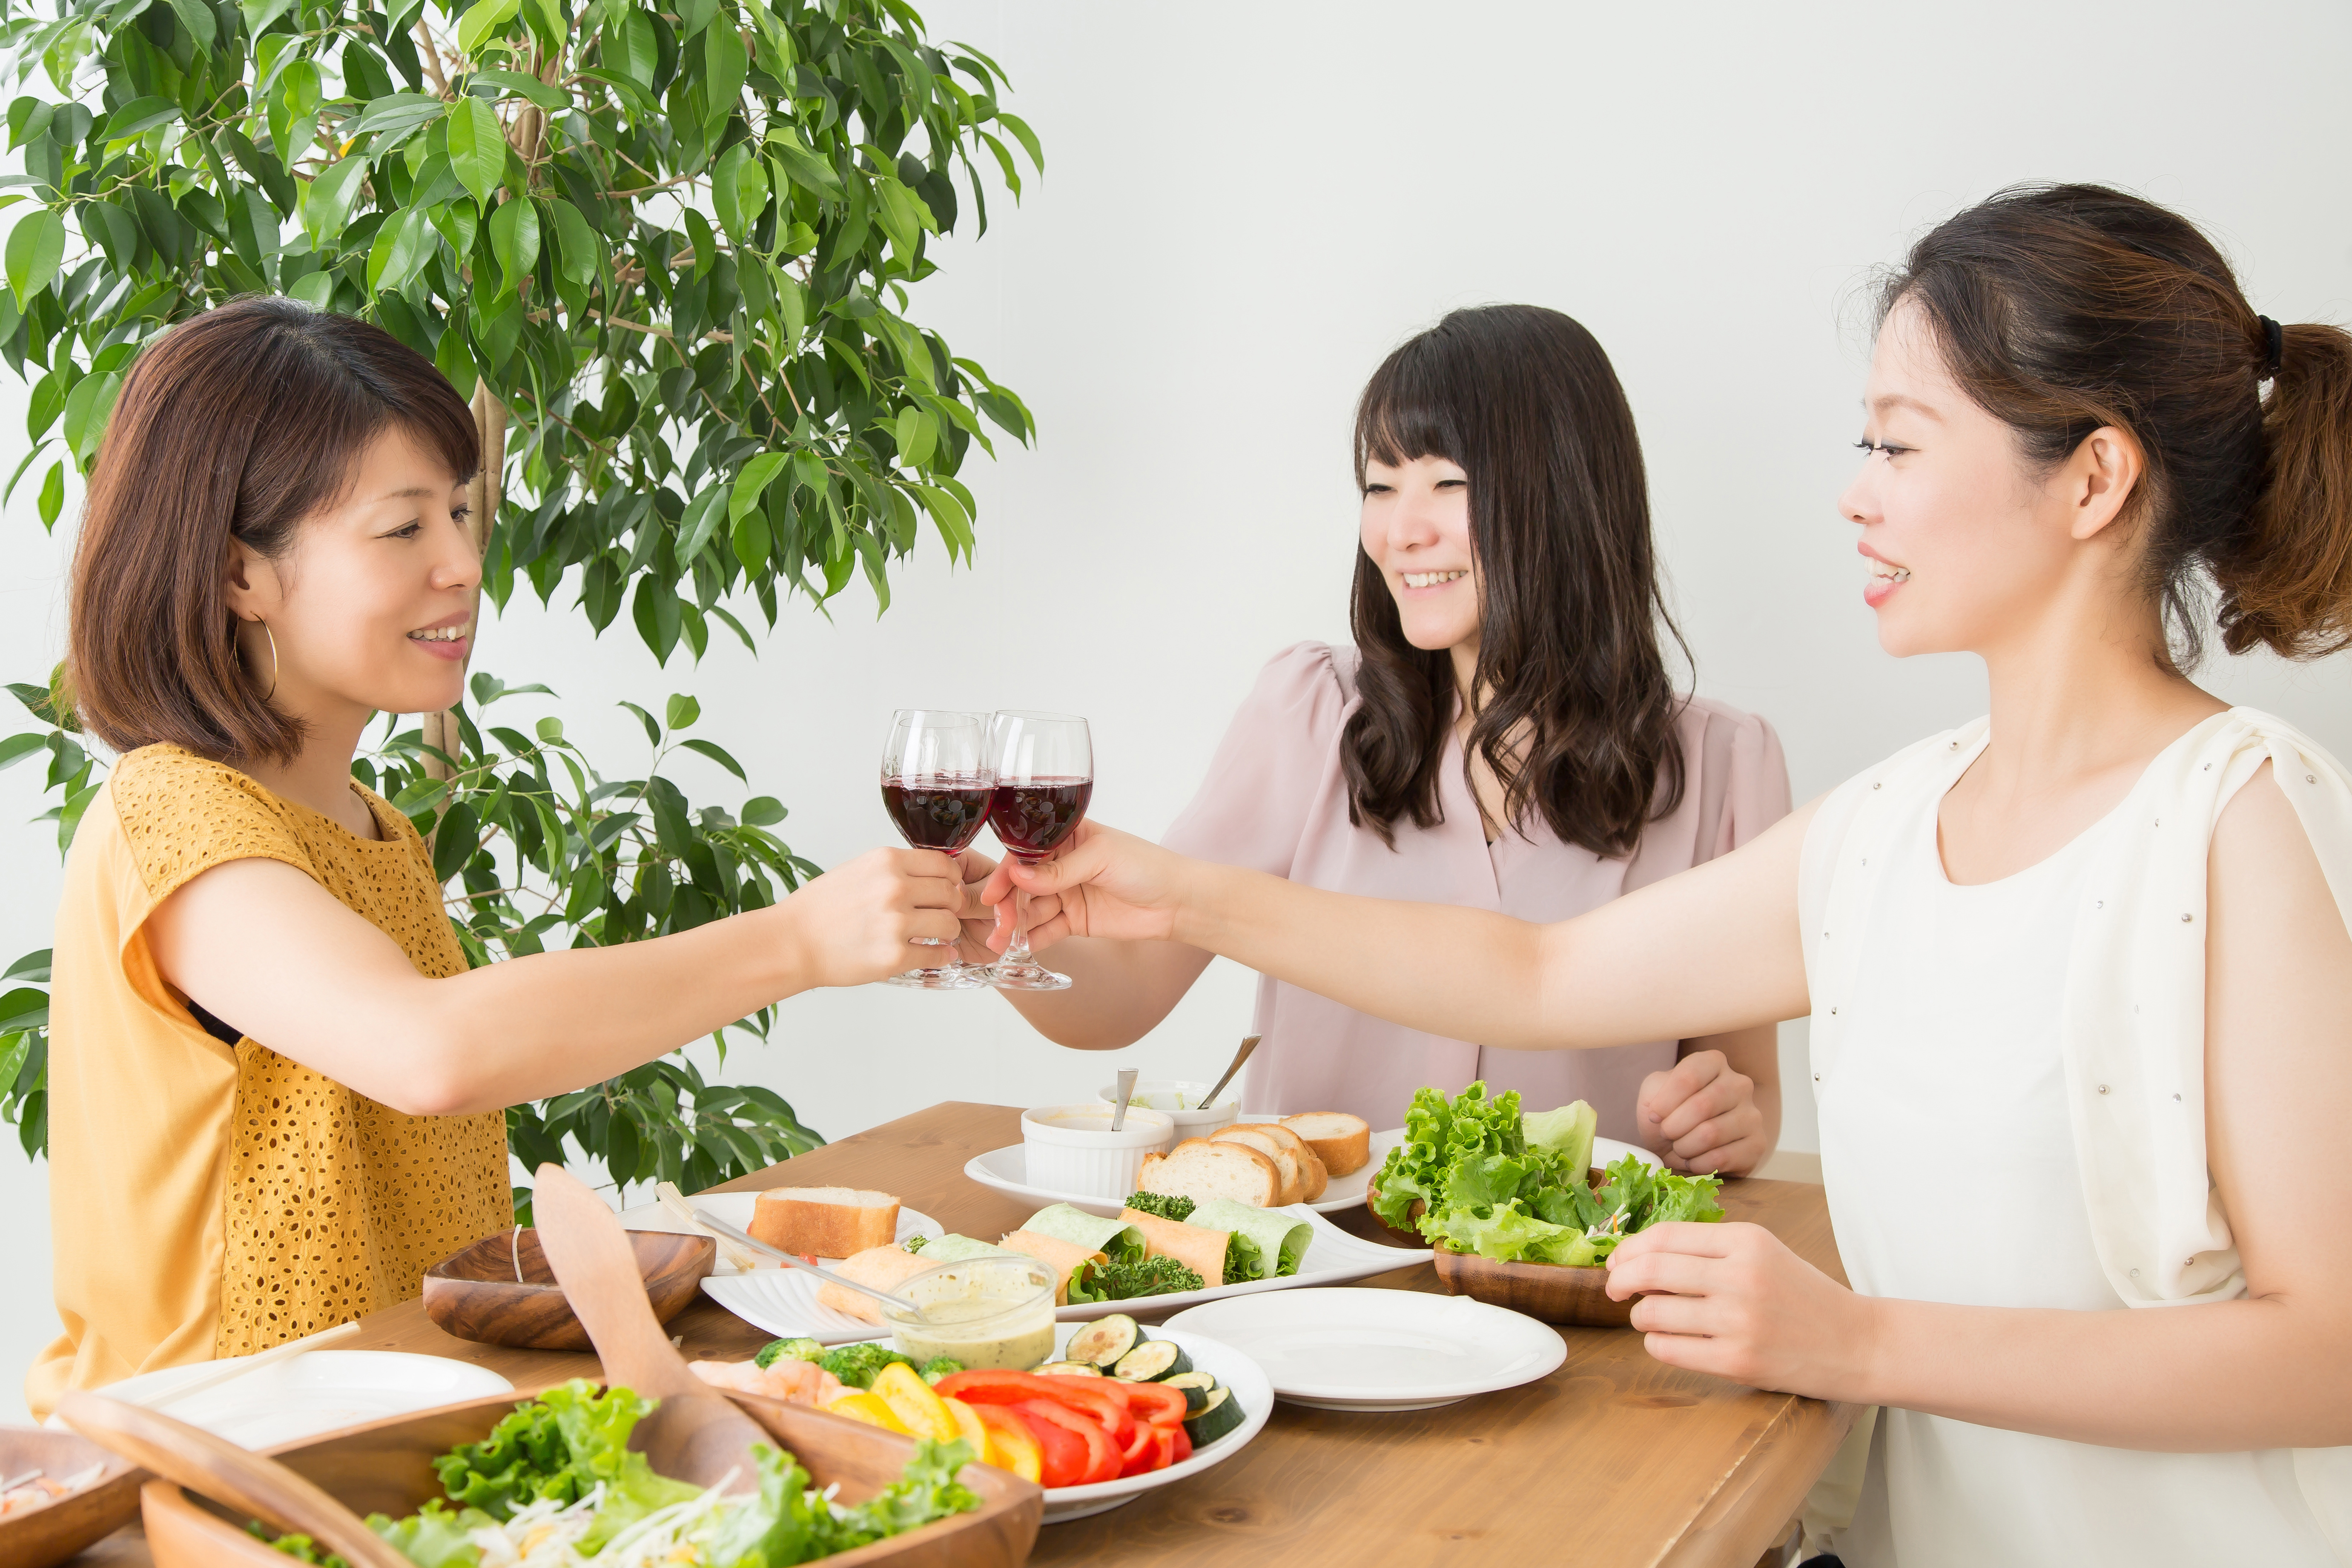 A trio of women from Asian descent cheers with red wine glasses paired with a spread of salads, sandwiches, and fresh vegetables